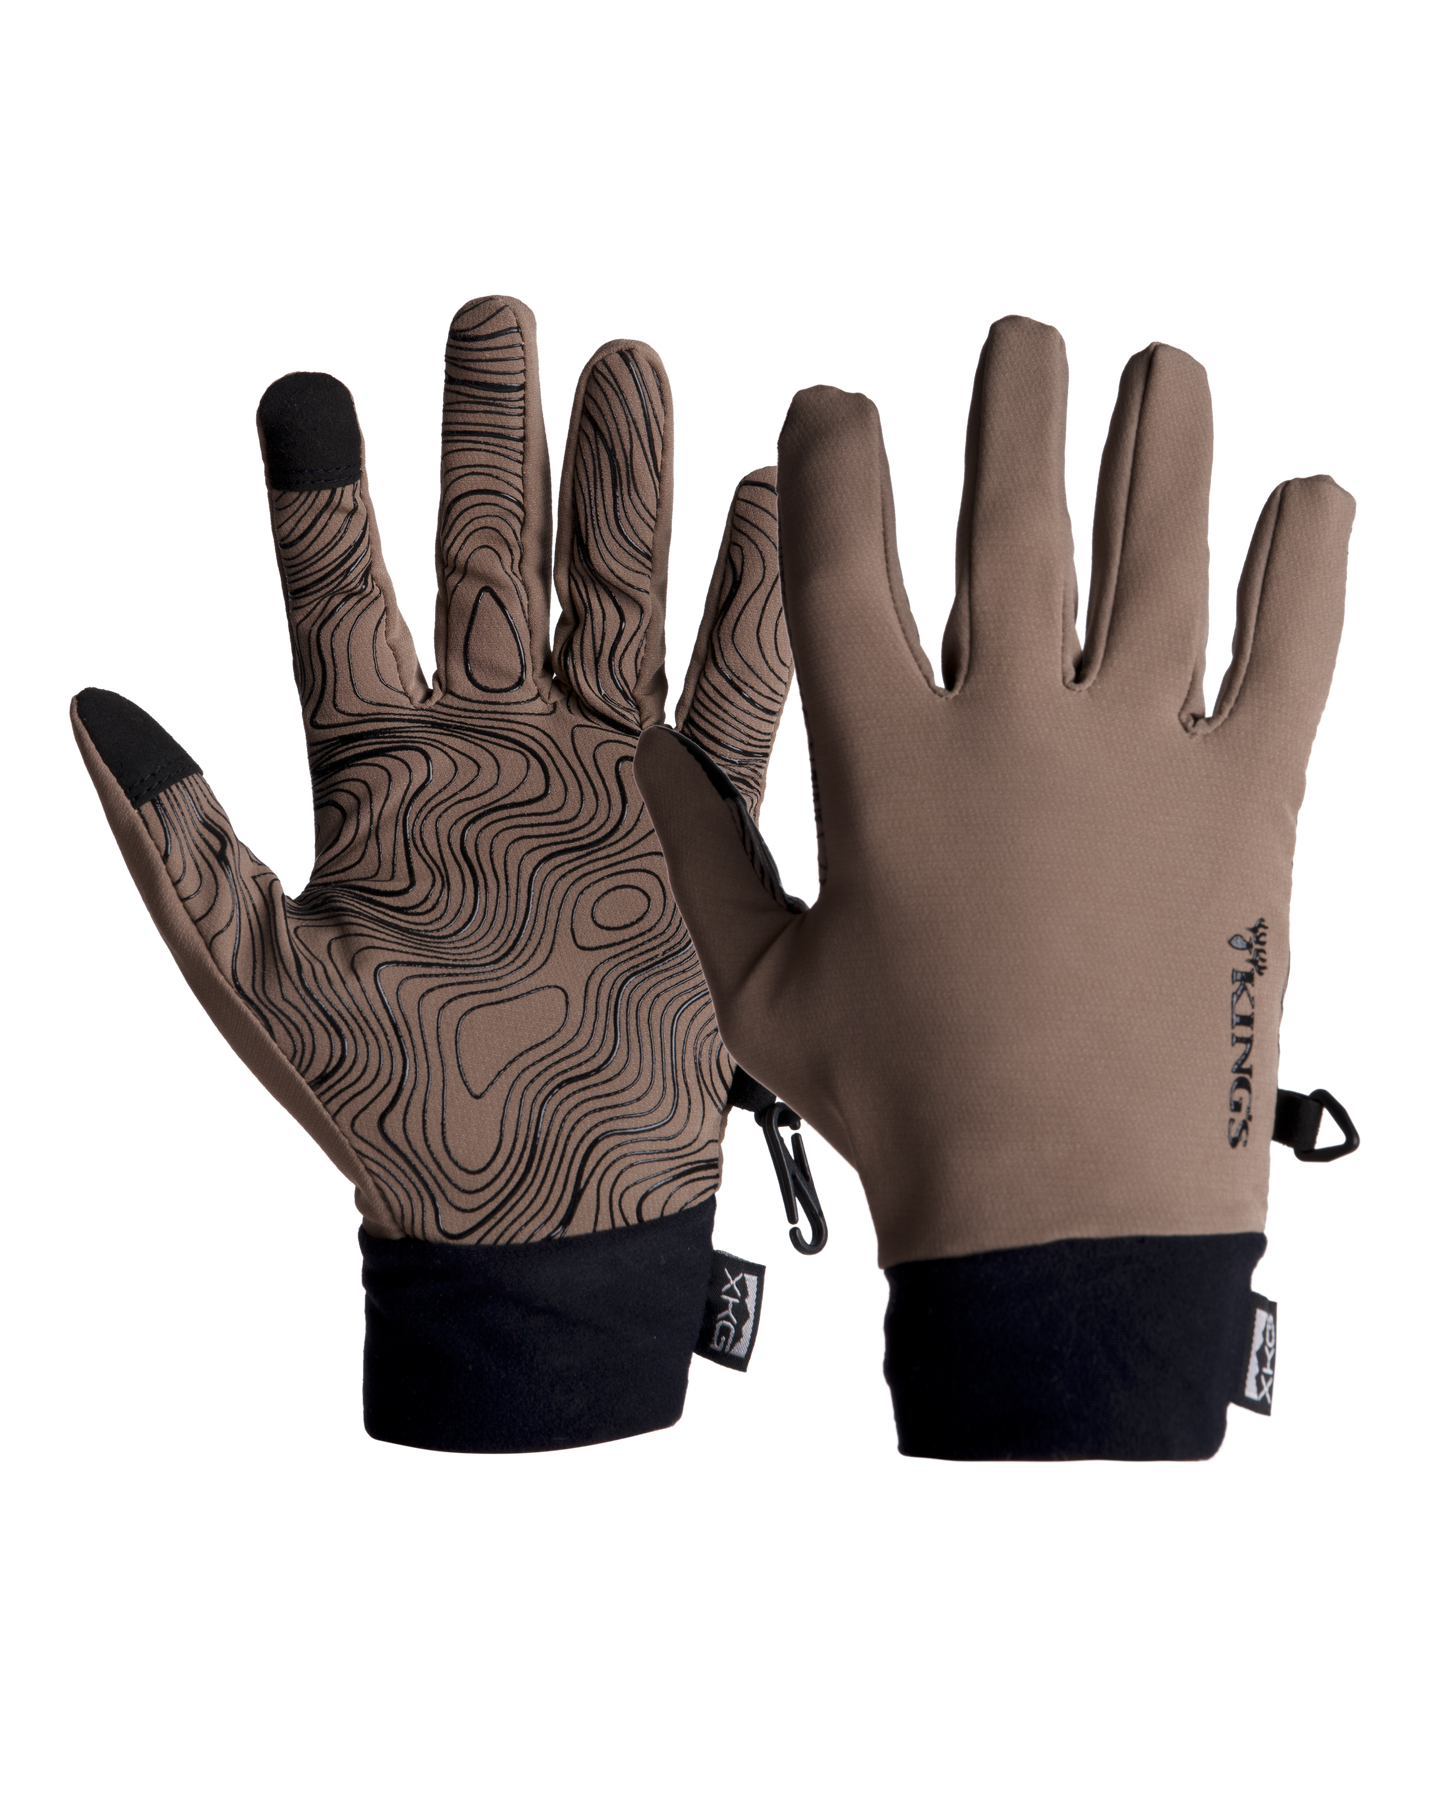 King's Camo XKG Insulated Gloves XK7